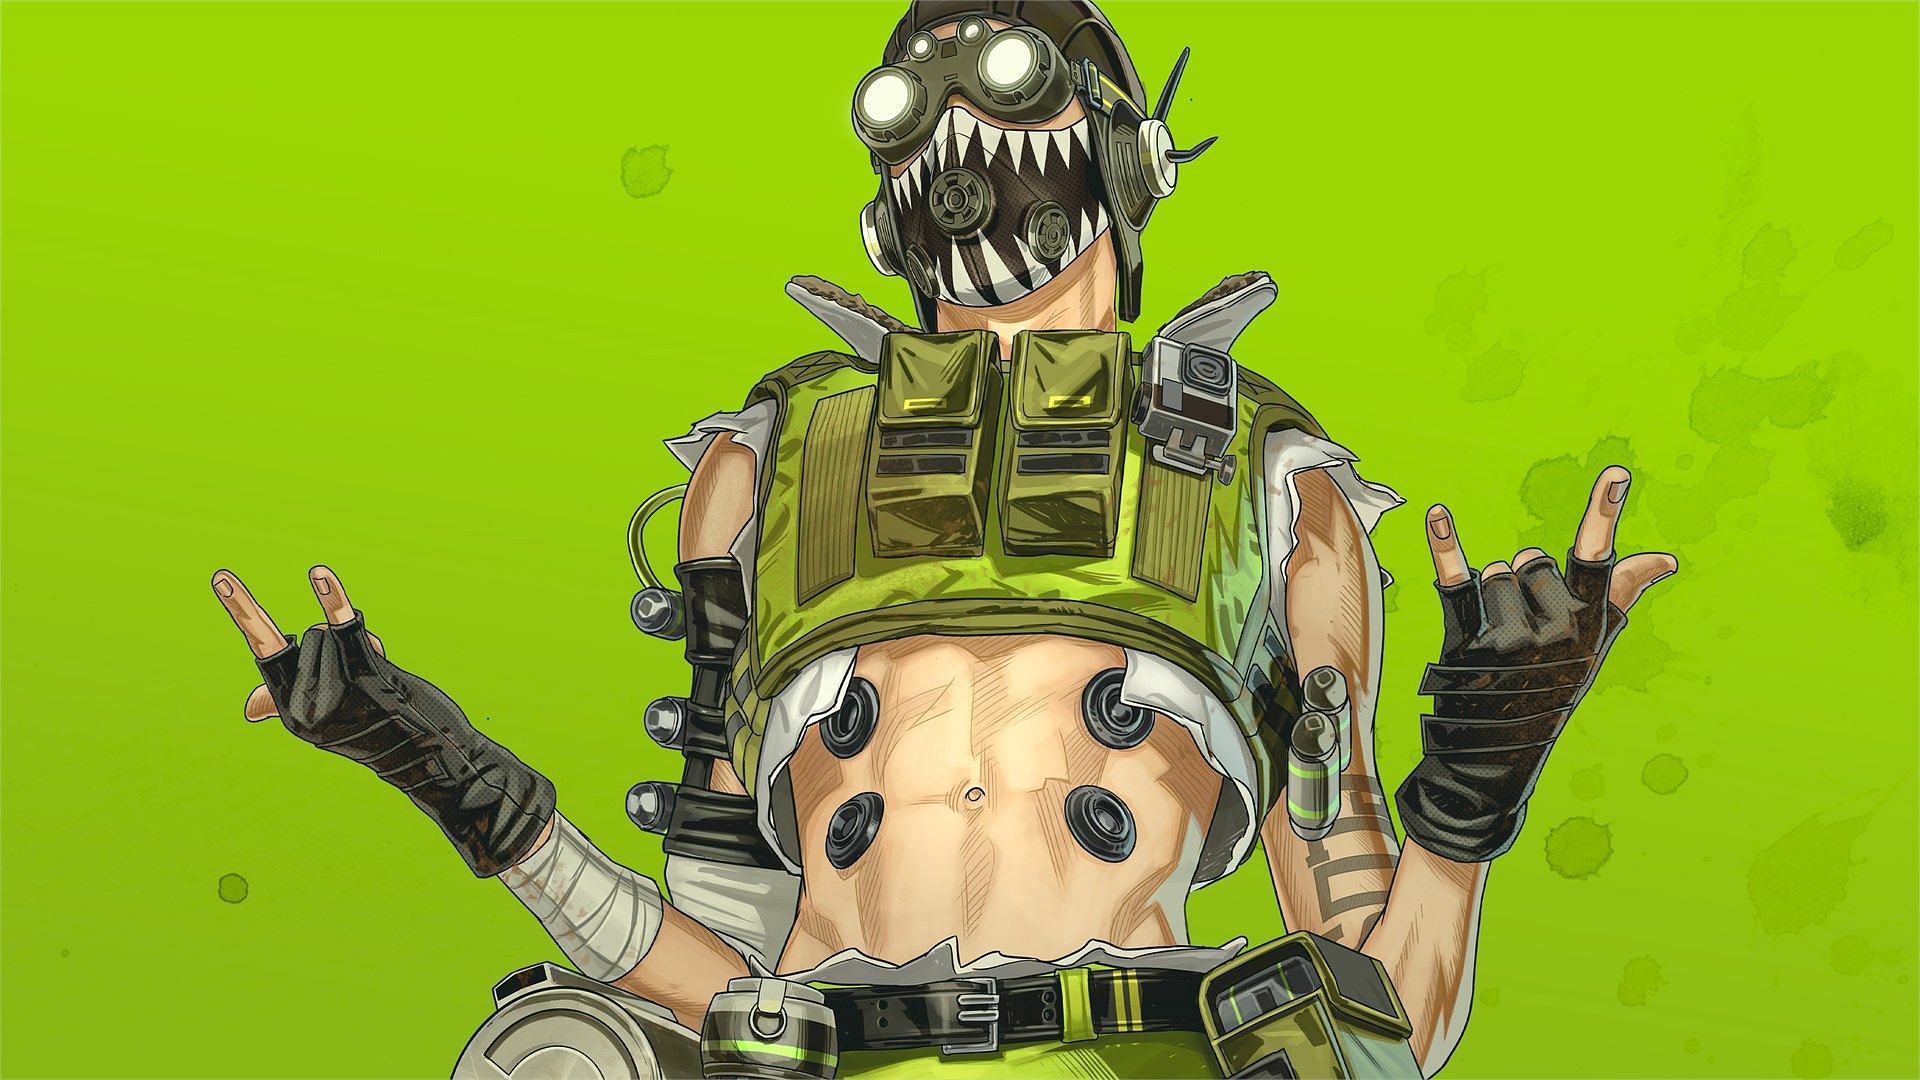 Octane is one of the fastest characters in Apex Legends (Image via Respawn Entertainment)